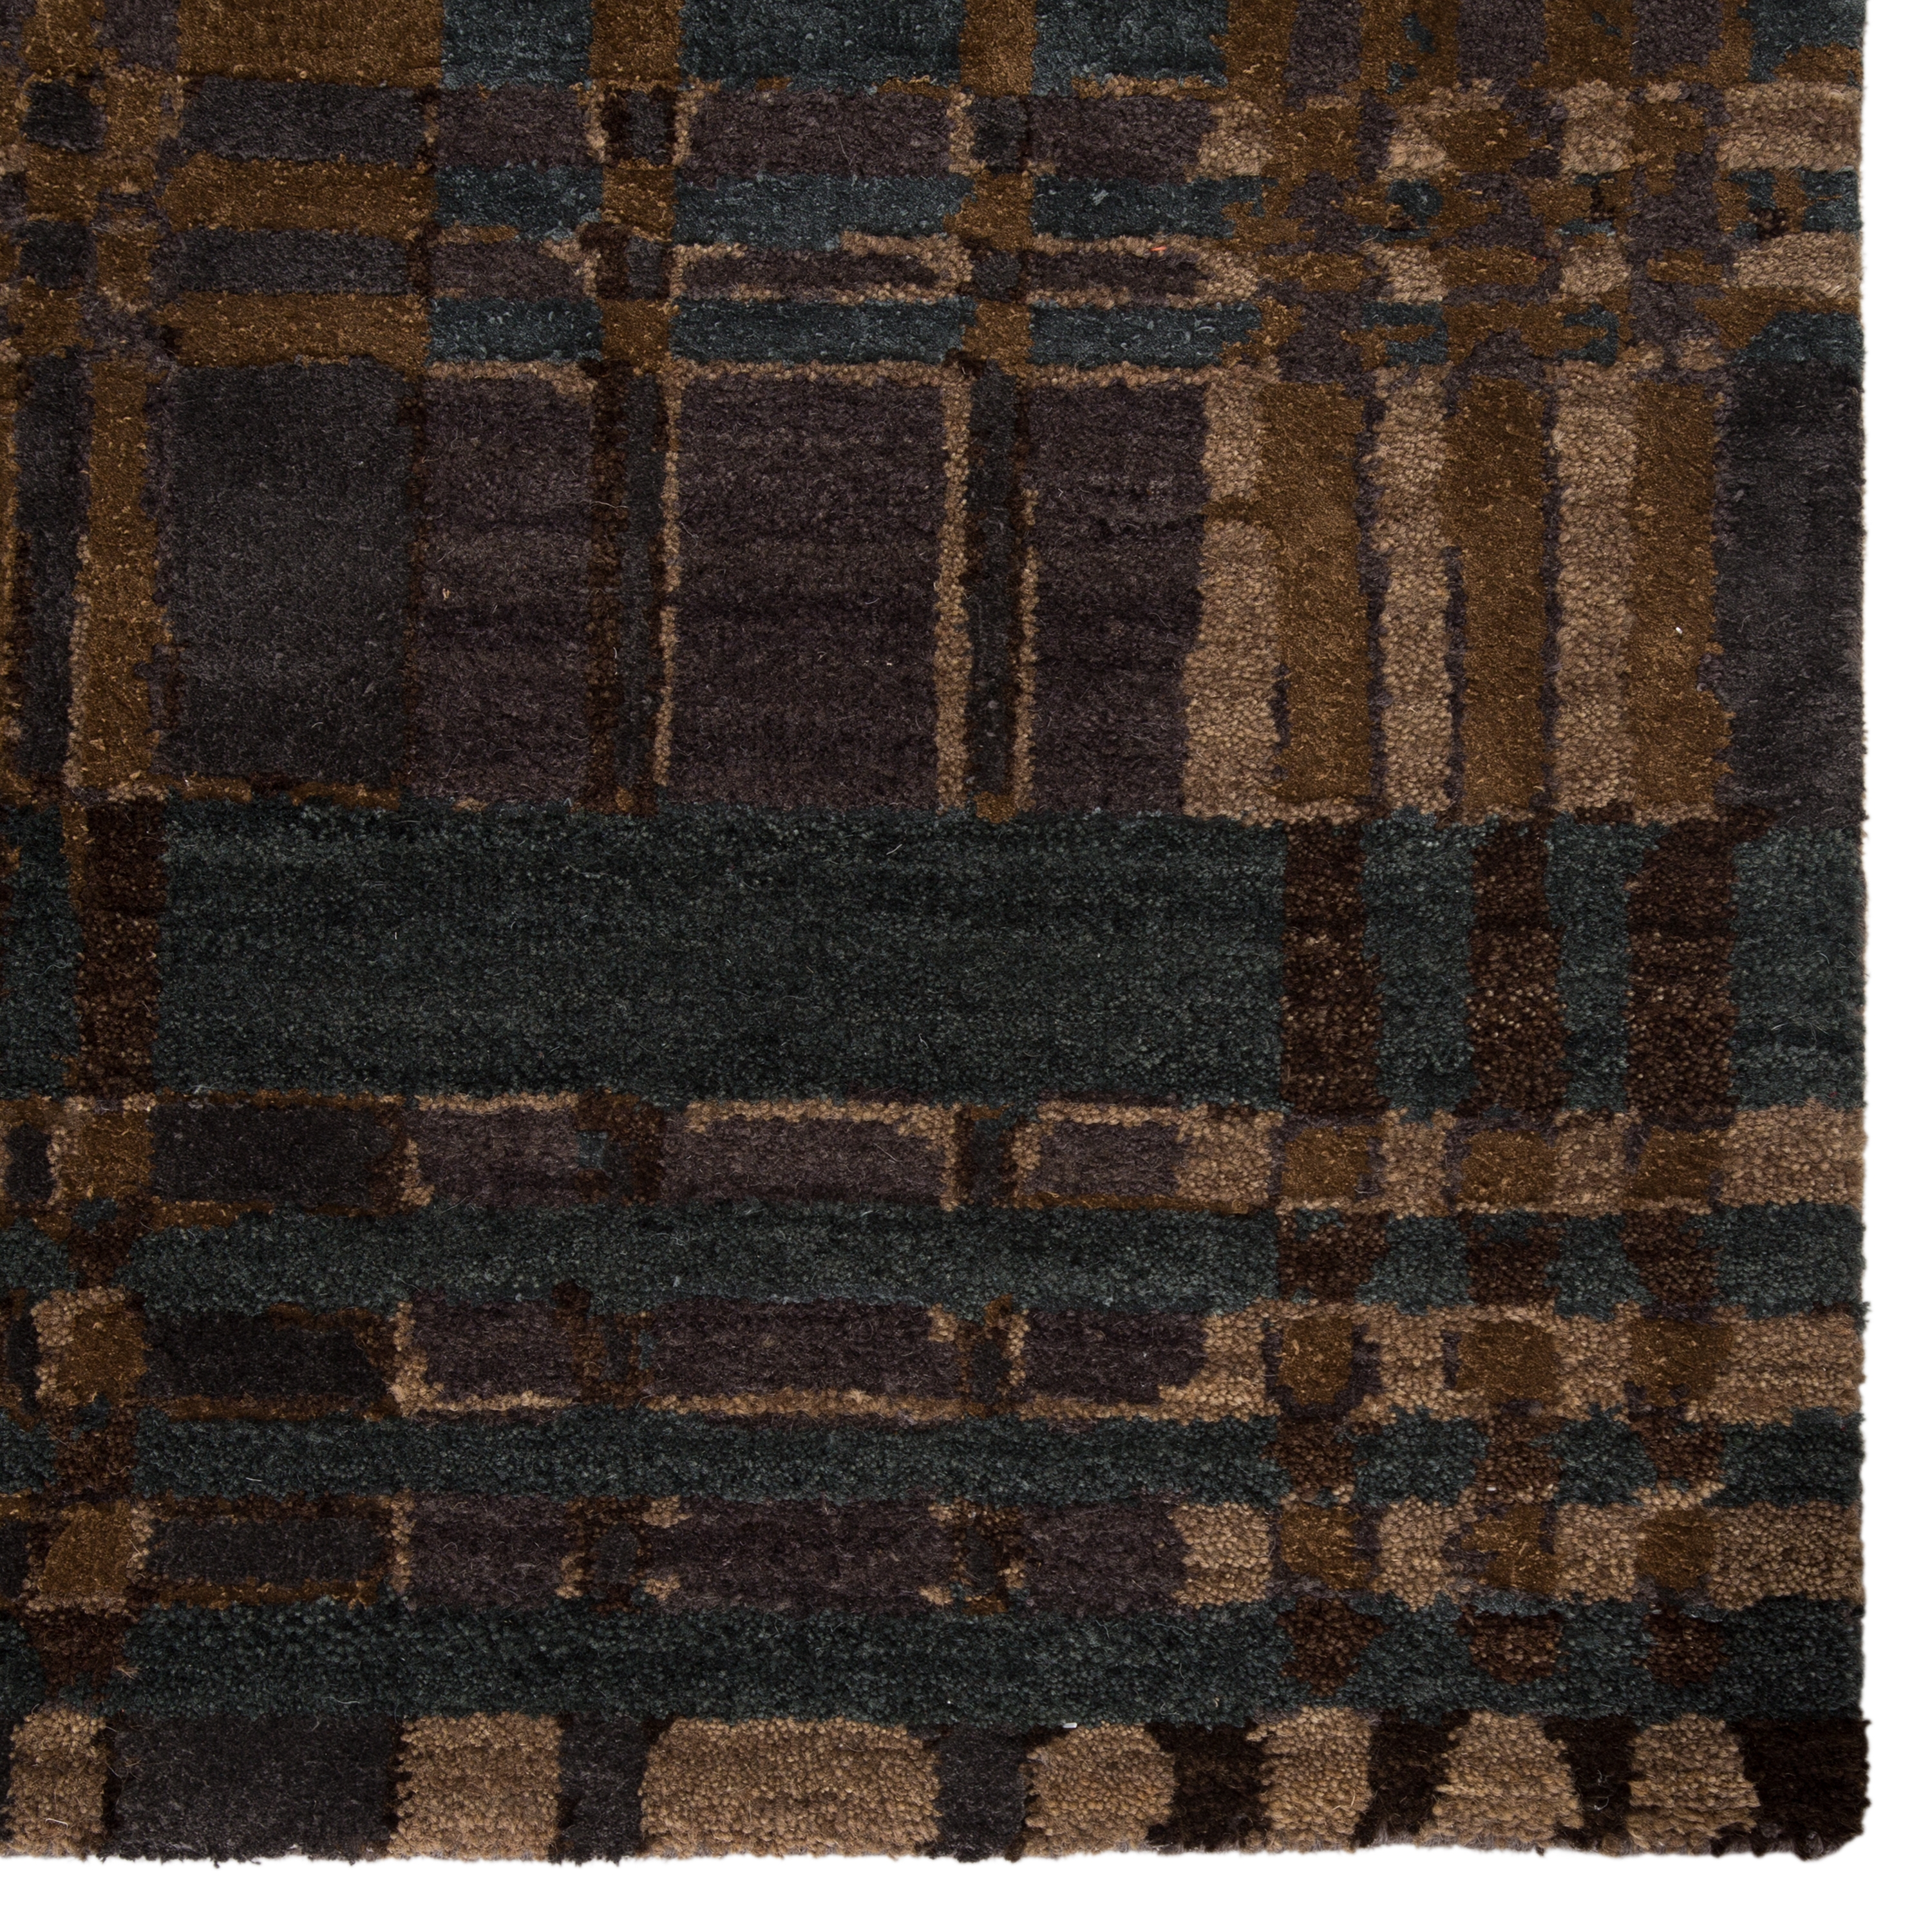 Jenny Jones by Outlander Hand-Knotted Geometric Green/ Brown Area Rug (8'X10') - Image 3